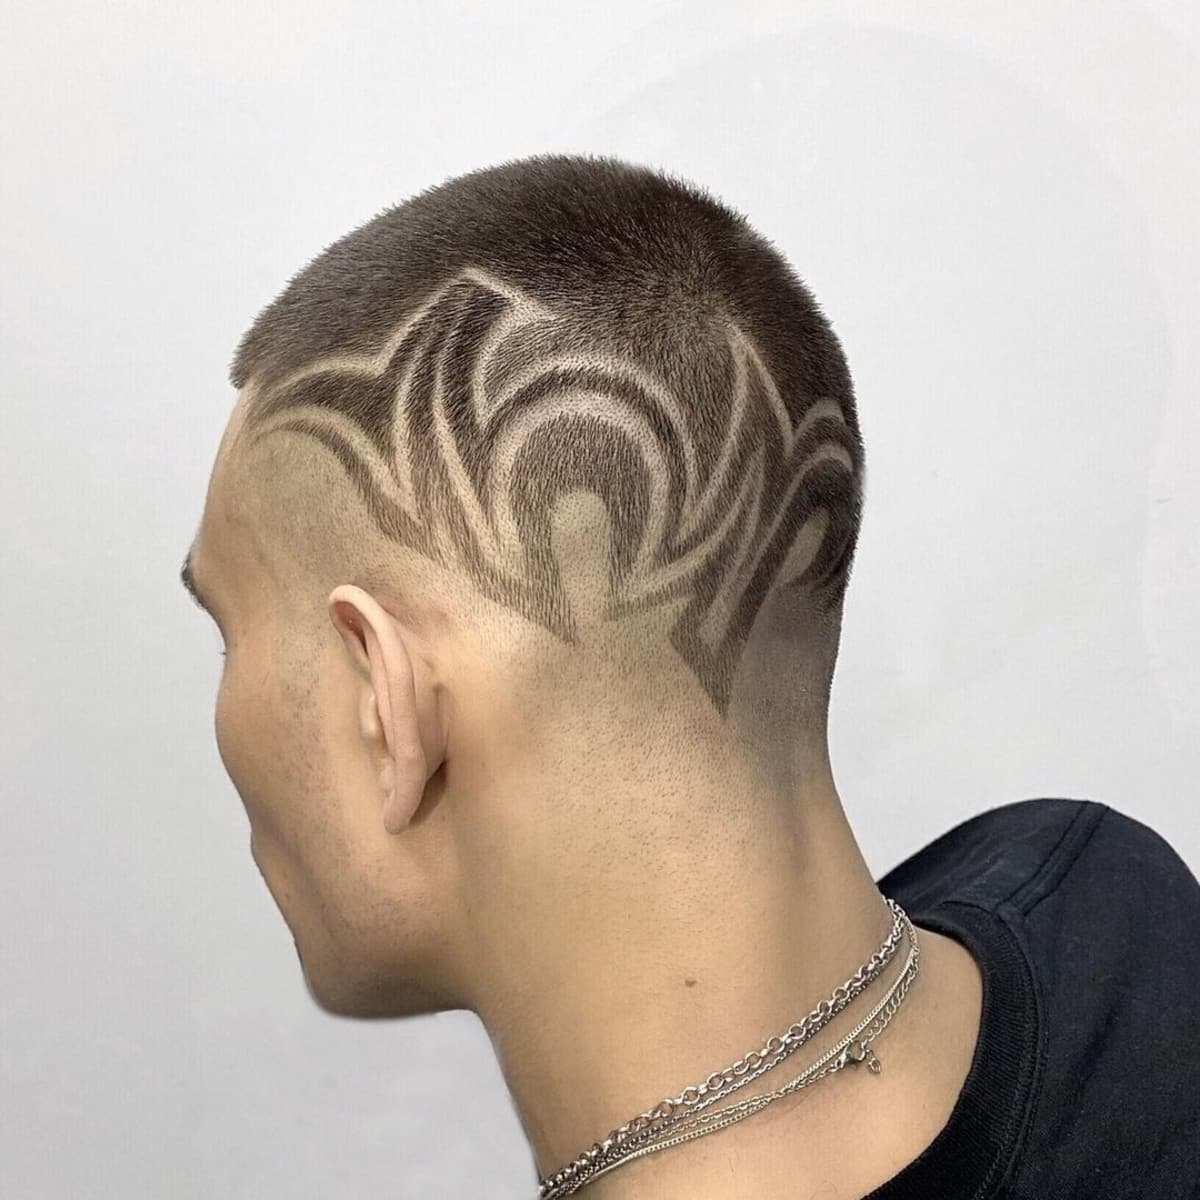 High fade and shaved abstract design for guys